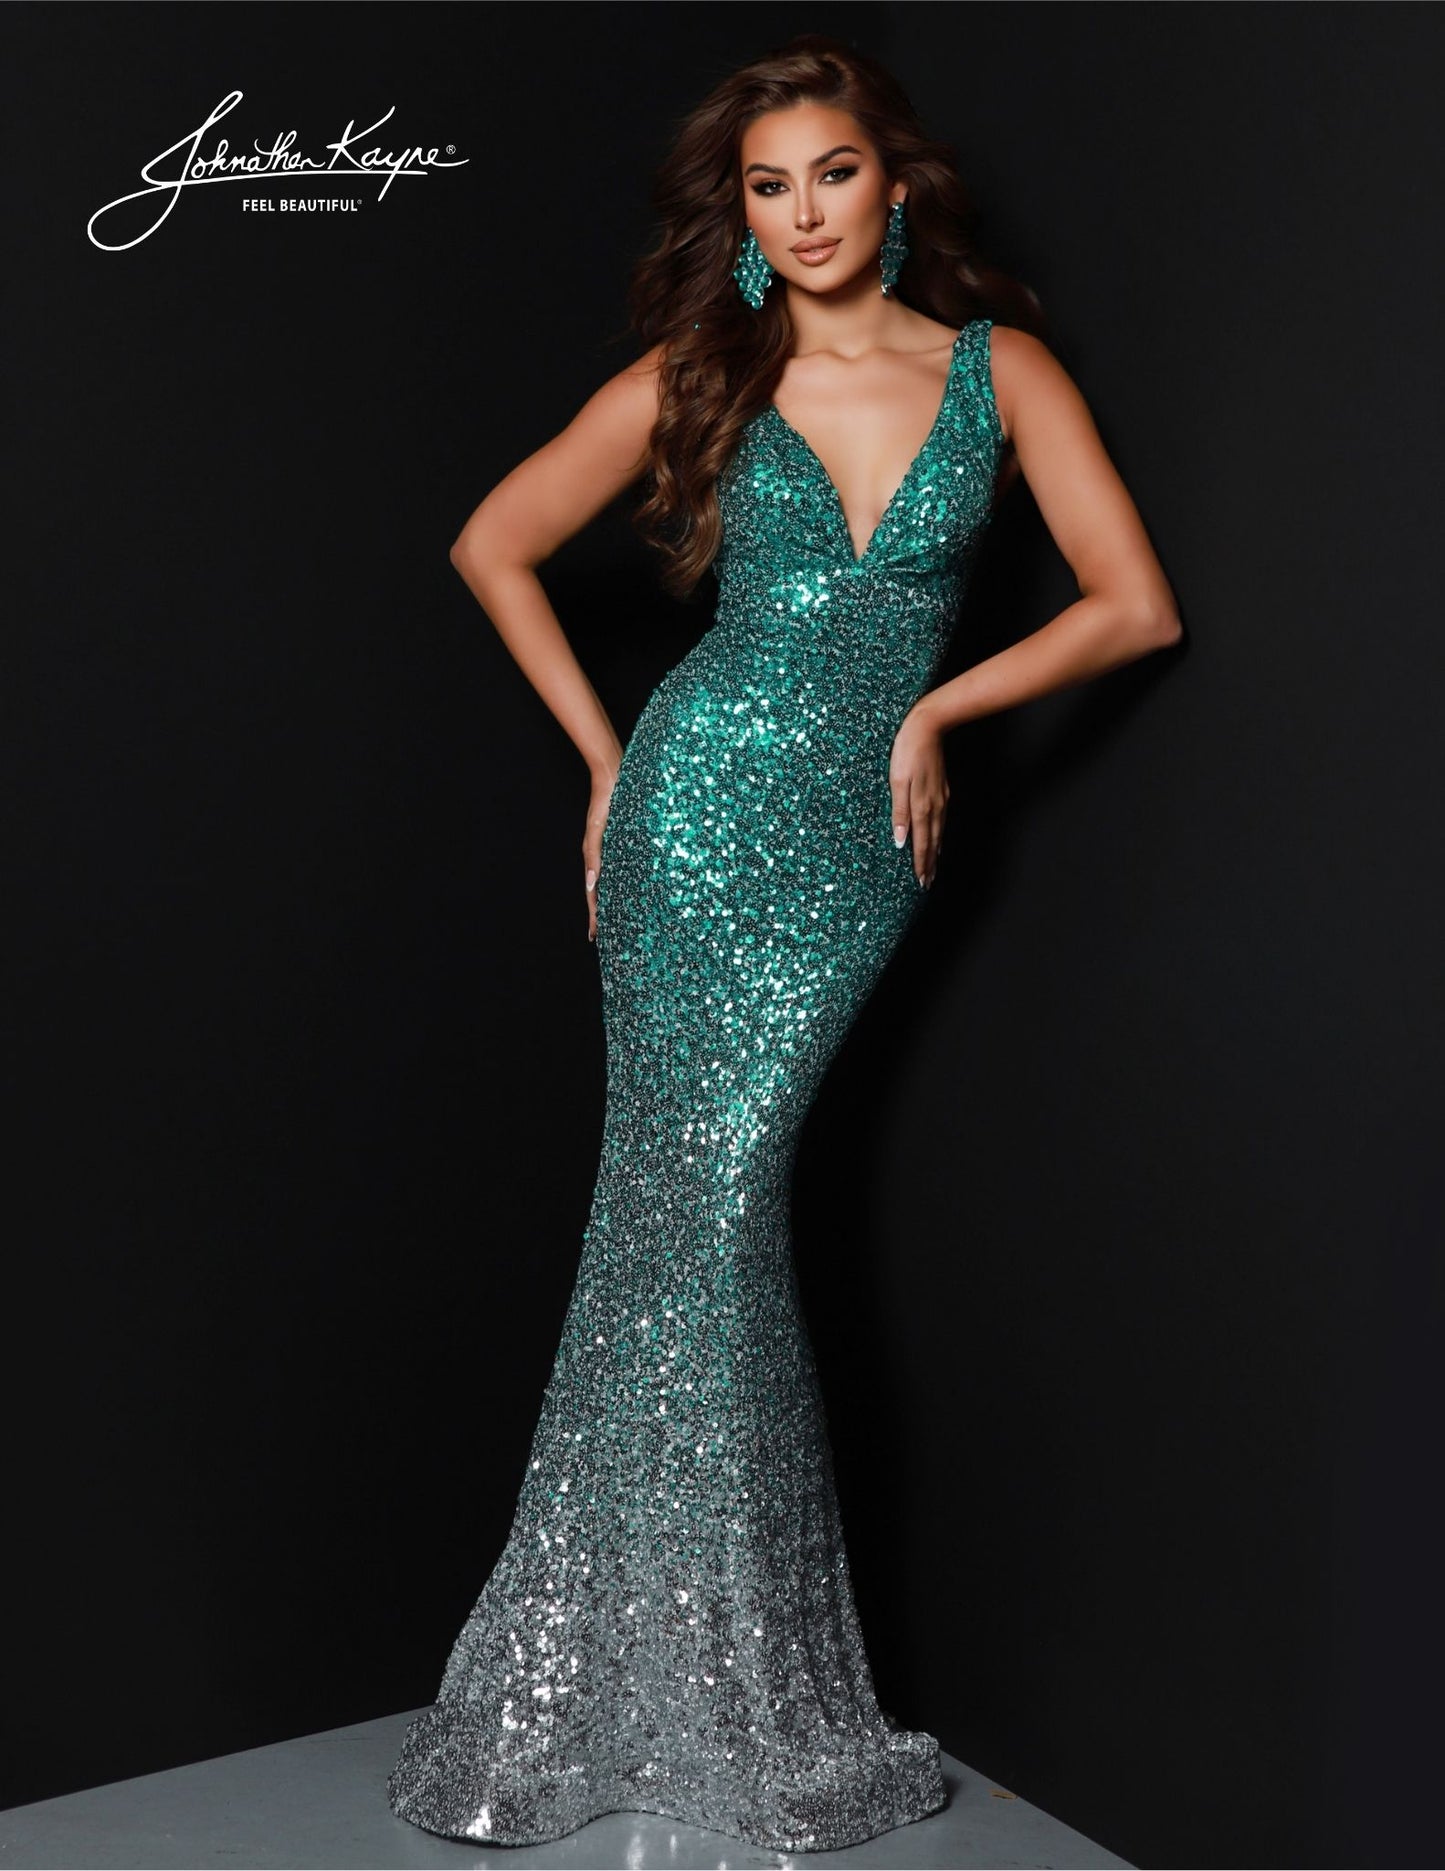 Look your best at any formal occasion in this Johnathan Kayne 2814 Long Prom Dress. With features such as a mermaid silhouette, v-neck, and sequin bodice, this dress is perfect for prom or any special event. An open back completes the look, allowing you to show off your style. Look stunning in this beautiful gown.